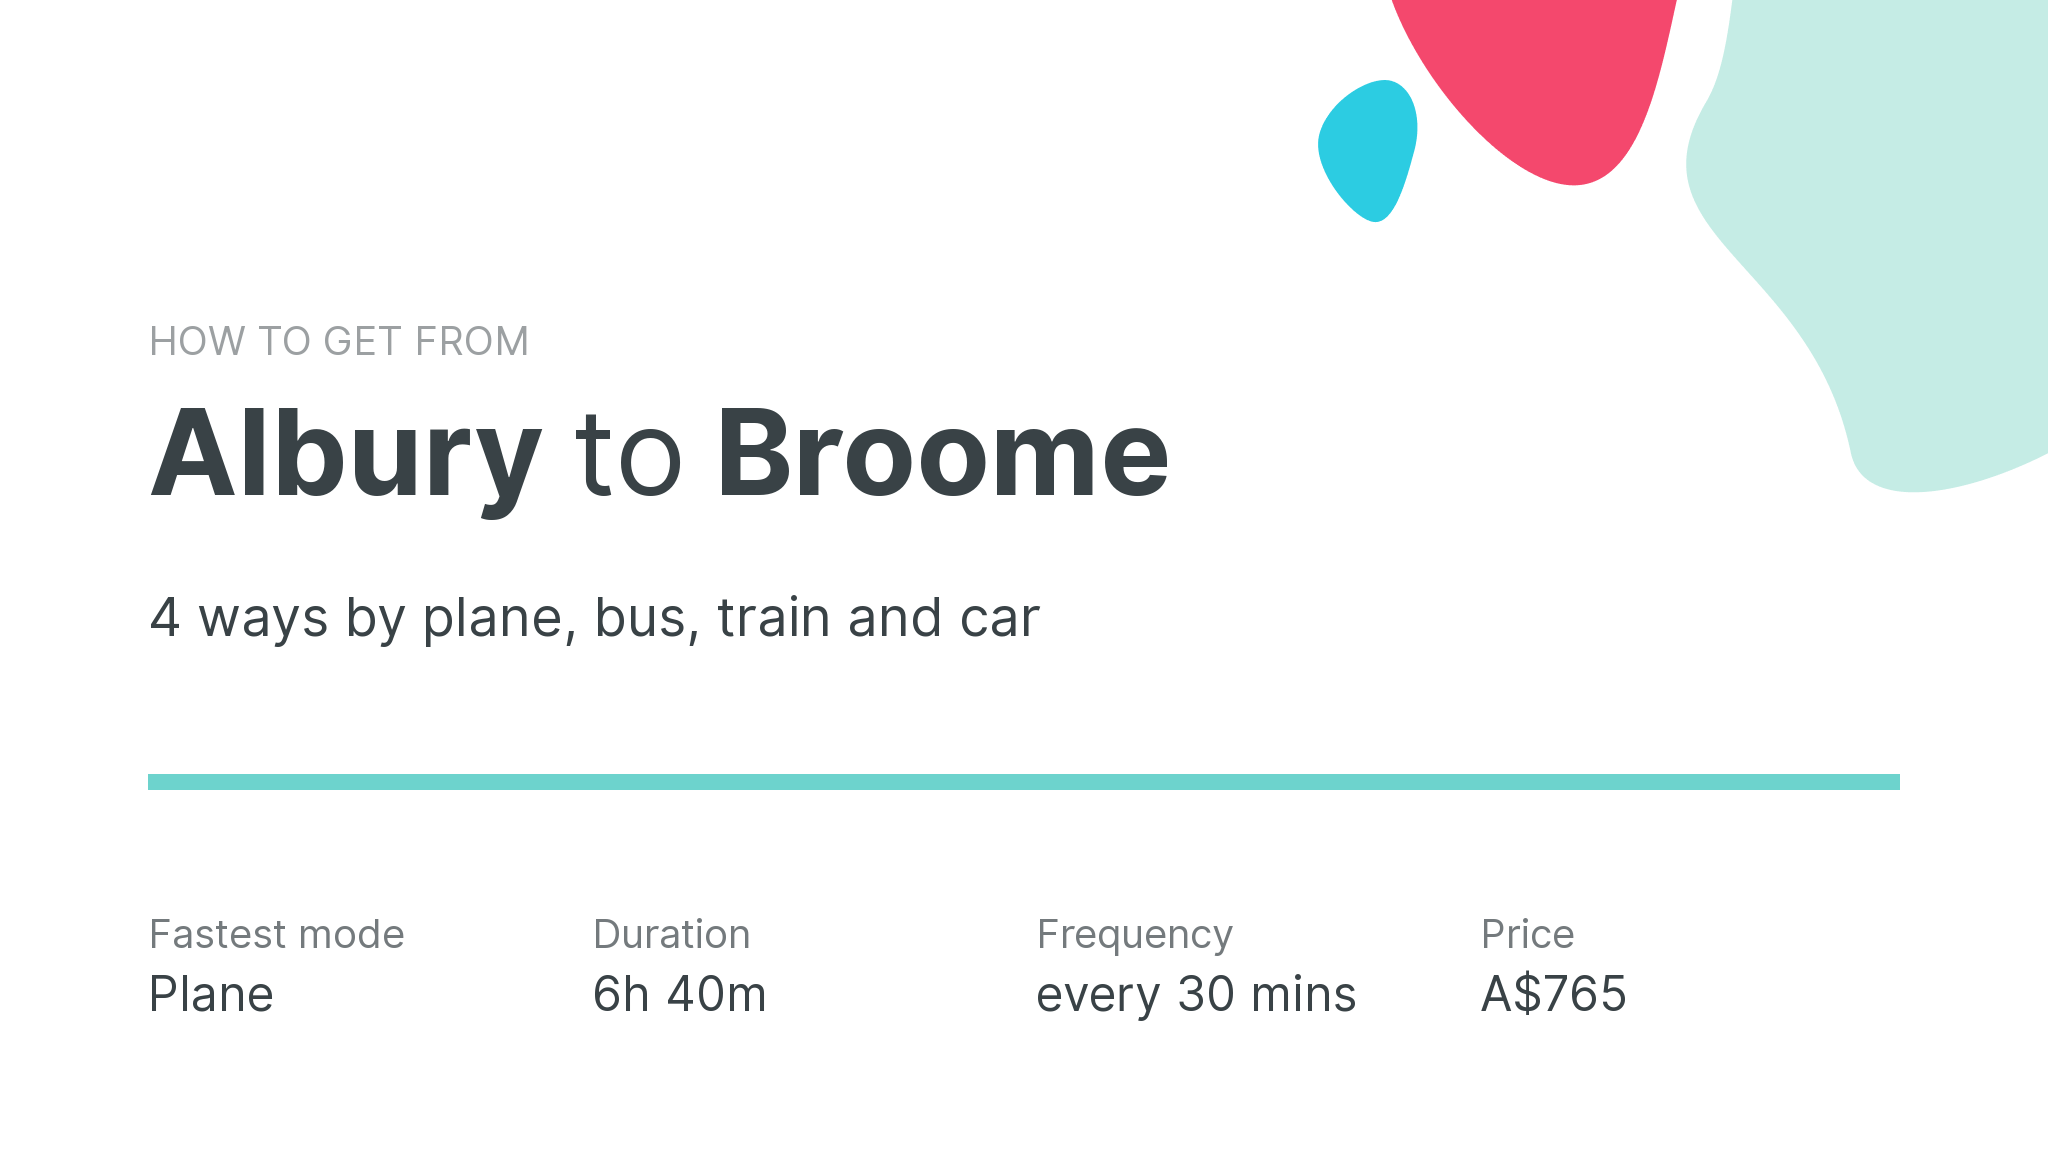 How do I get from Albury to Broome